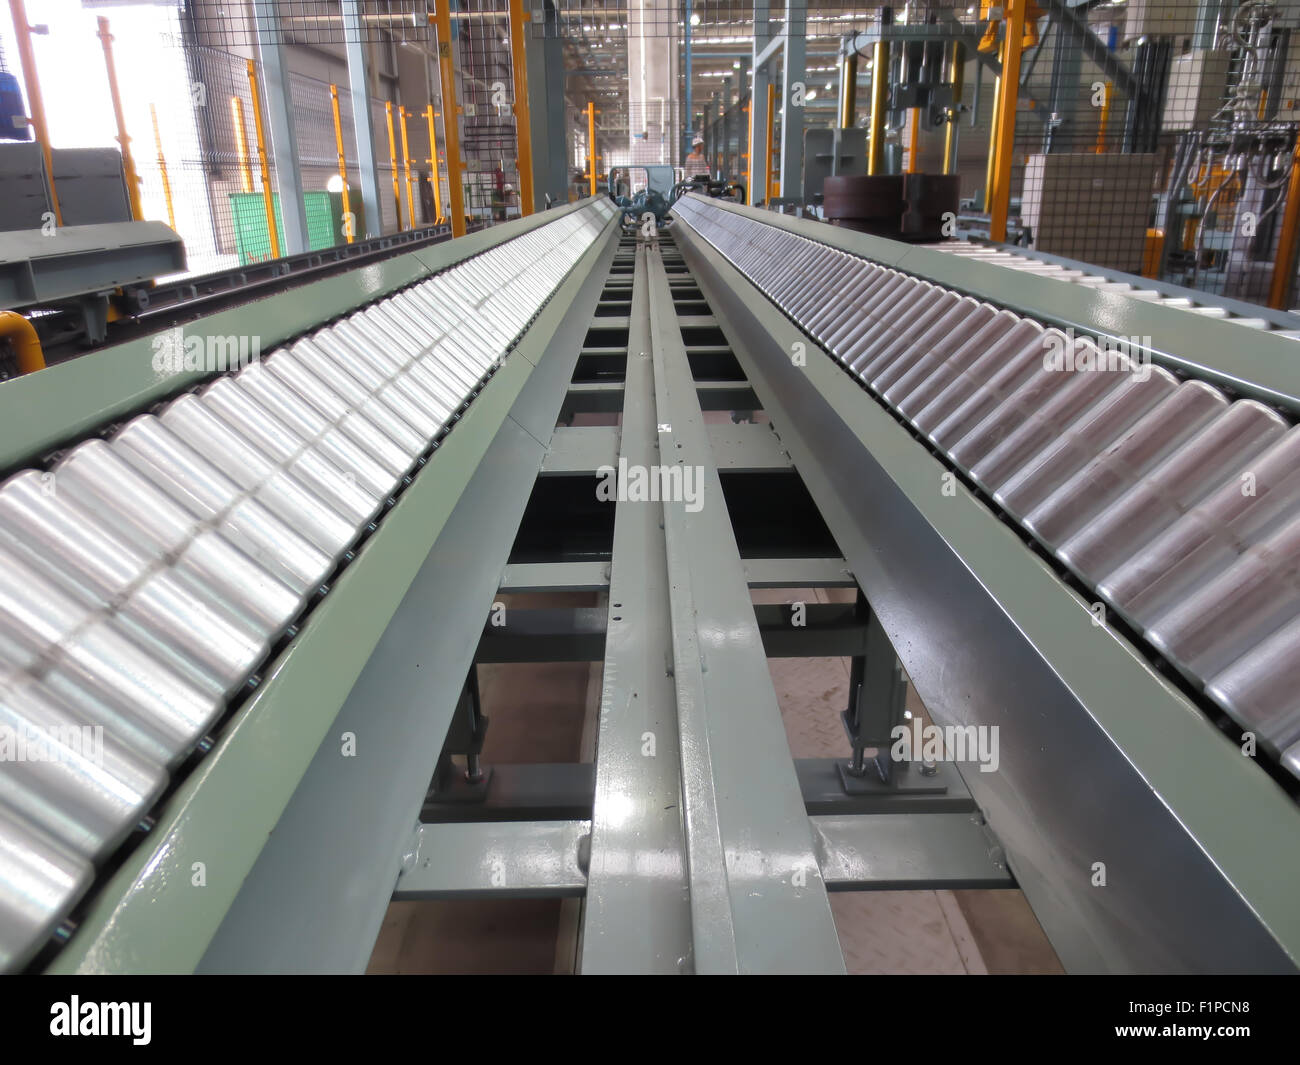 Conveyor for transporting the plant. Stock Photo